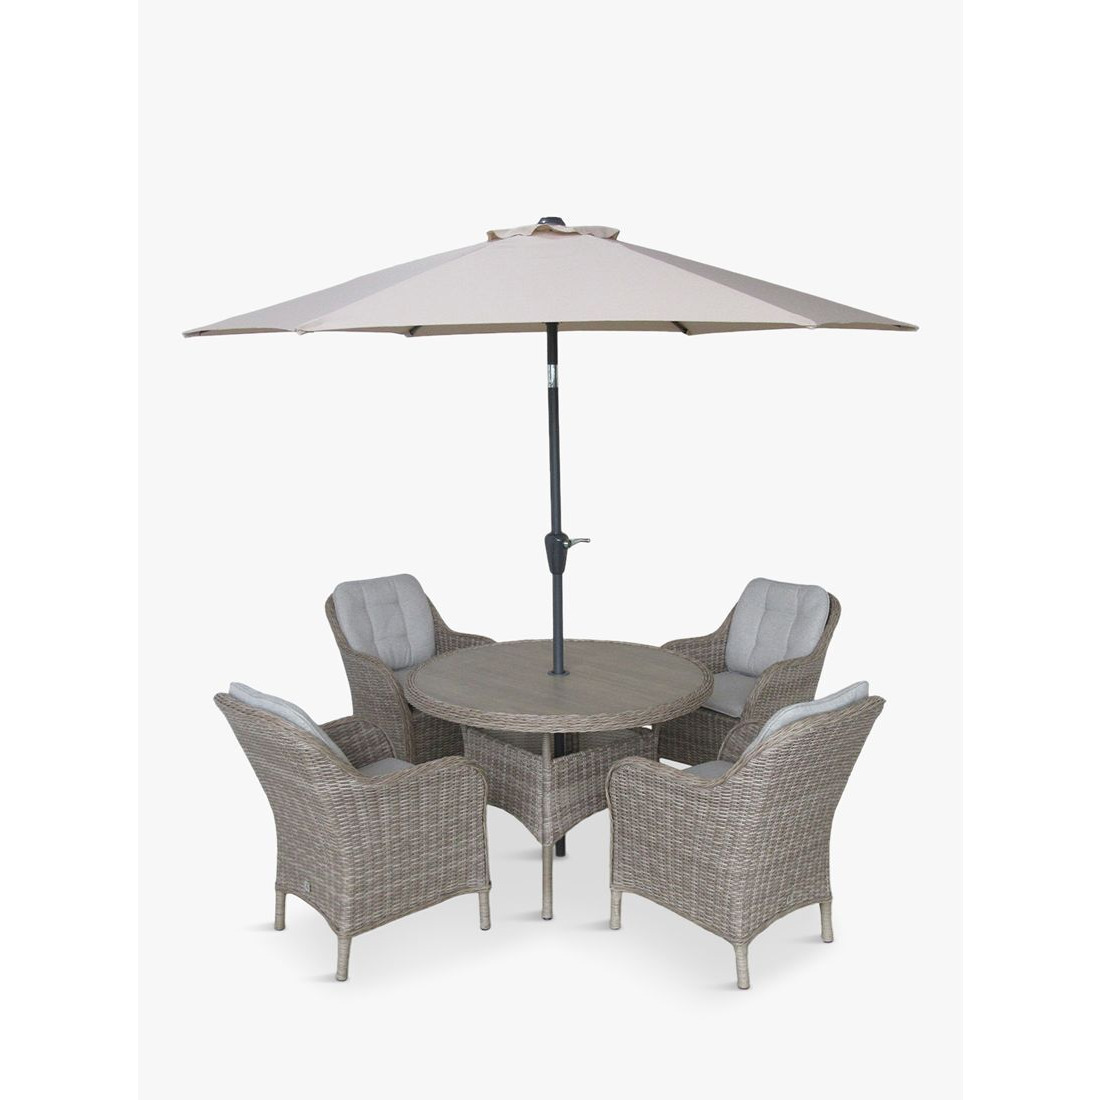 LG Outdoor St Tropez 4-Seater Round Garden Dining Table & Chairs Set with Parasol - image 1